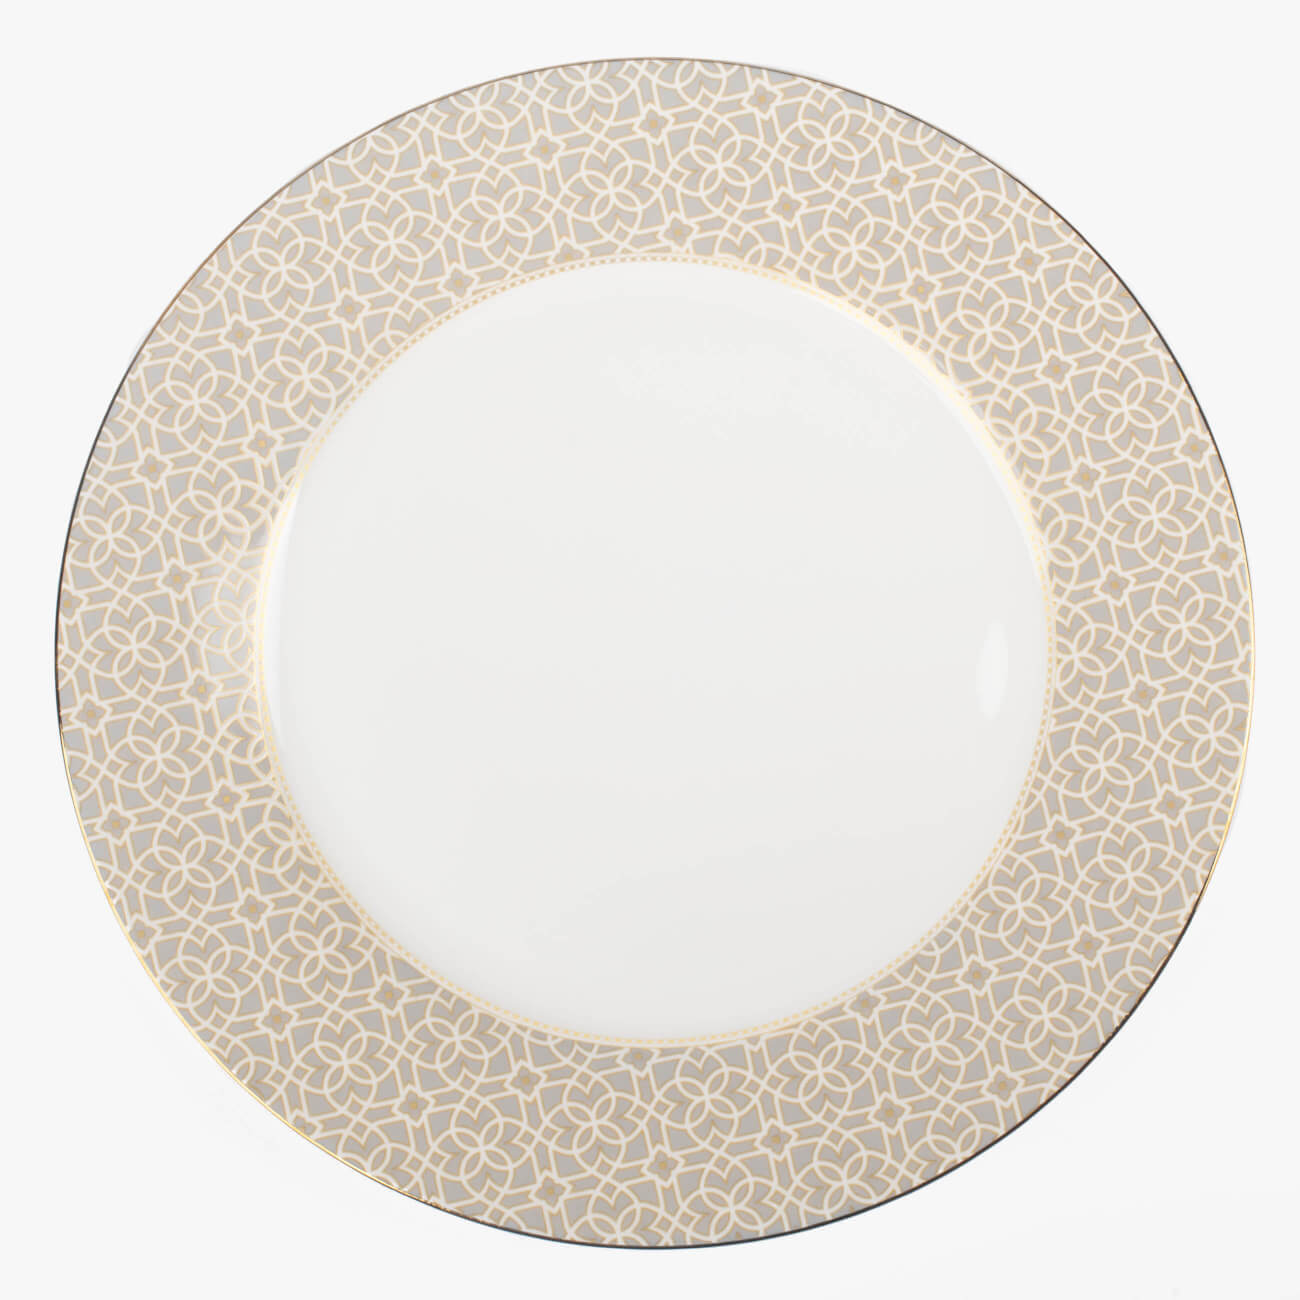 Dining plate, 27 cm, porcelain F, gray, with golden edging, Ornament, Liberty изображение № 1